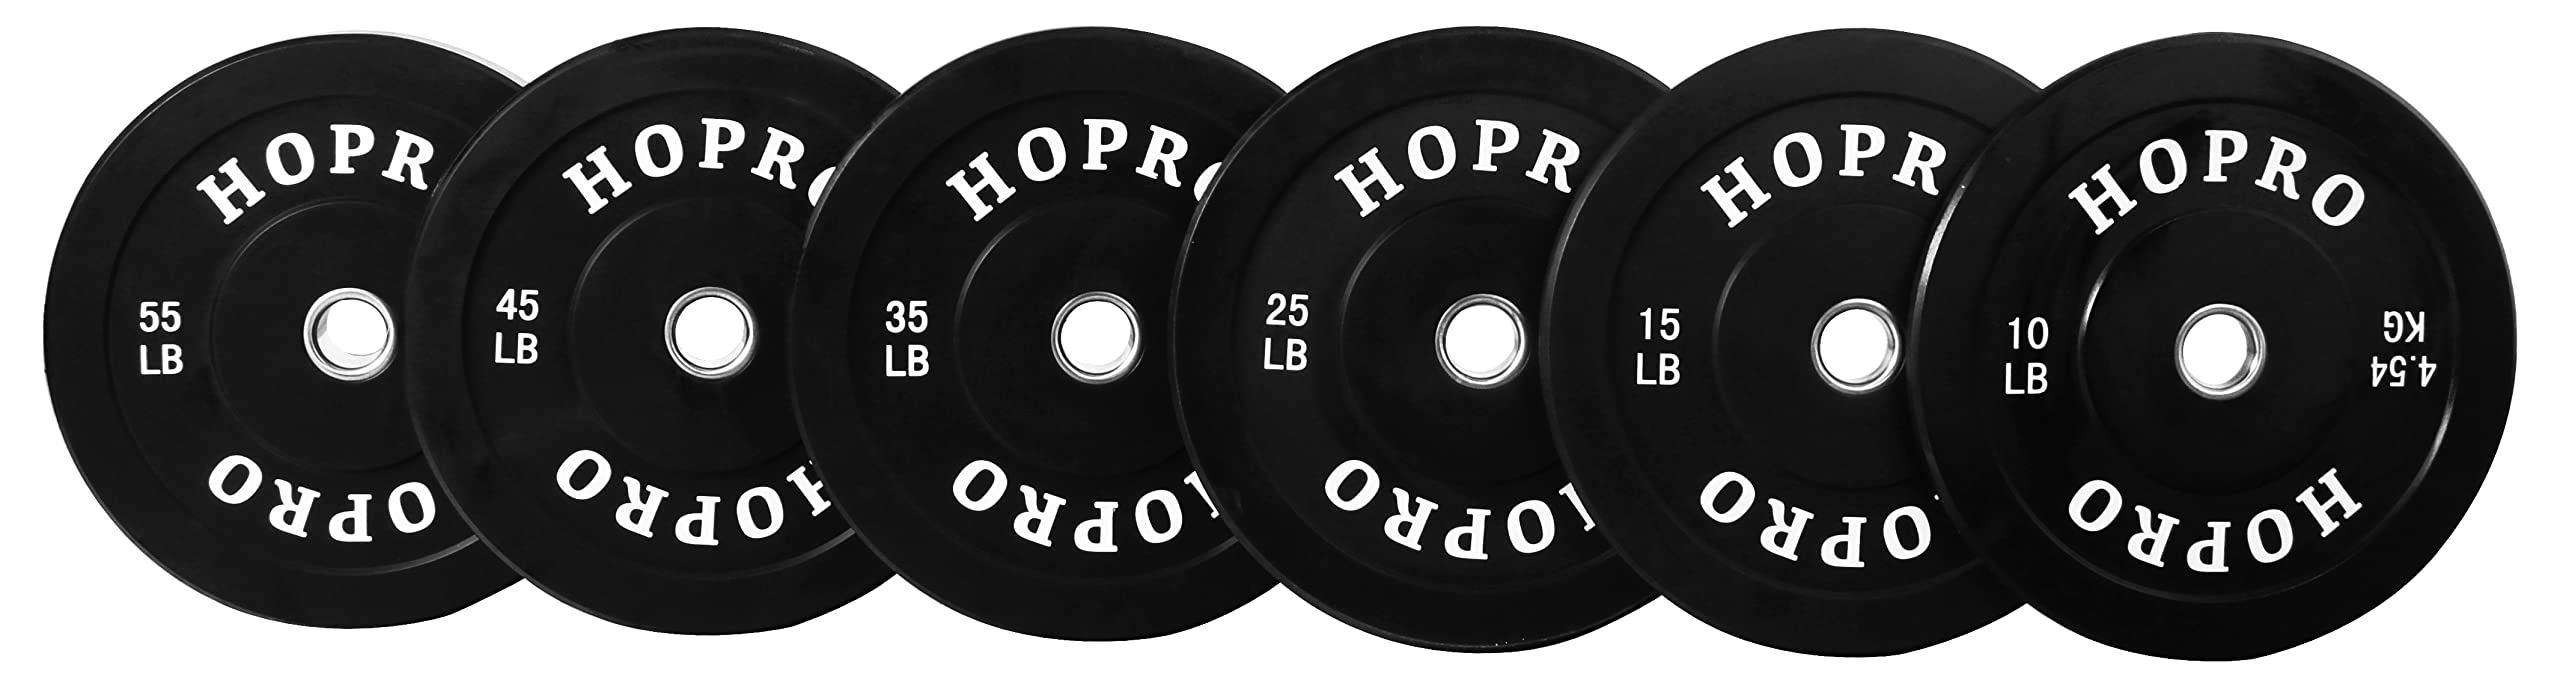 BalanceFrom HoPro Olympic Bumper Plate Weight Plate with Steel Hub, Pairs or Sets, Black